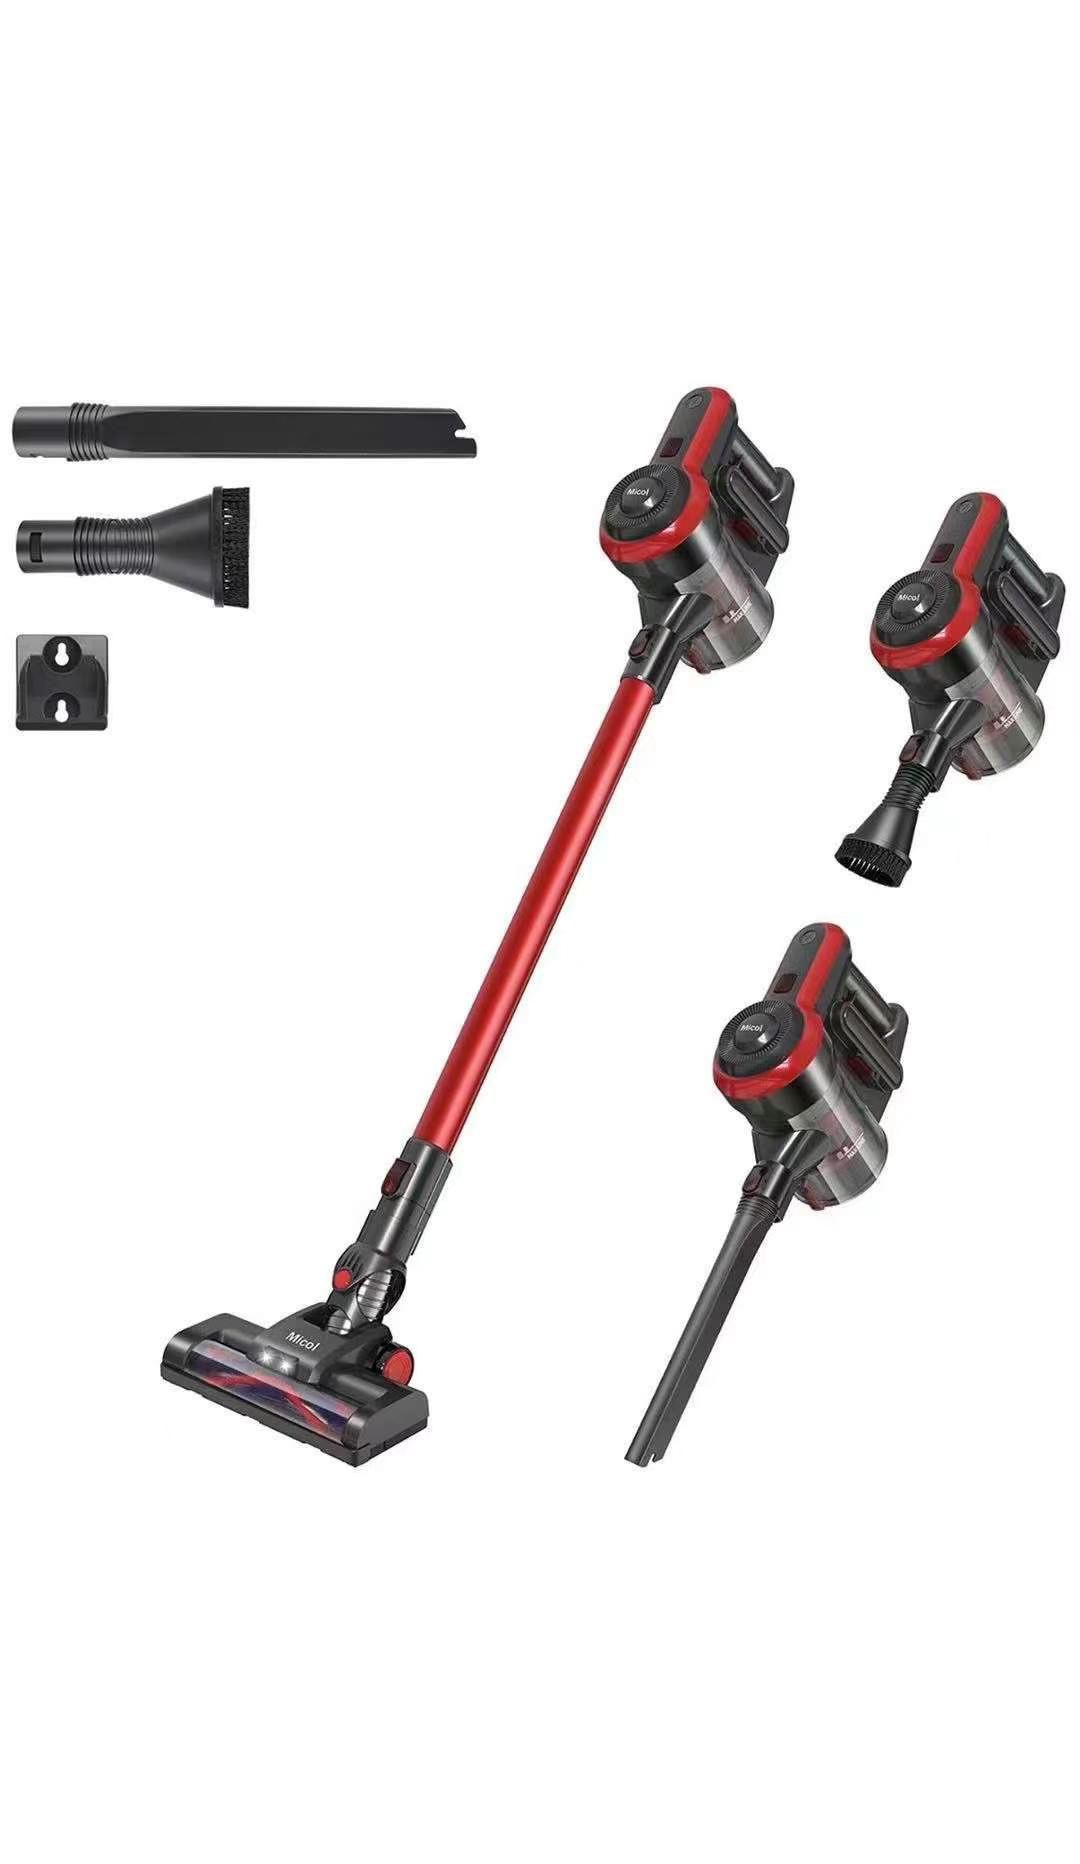 Cordless Vacuum Cleaner, 22Kpa Powerful Suction 4 in 1 Stick Vacuum, Up to 38 Mins Max Runtime Detachable Battery for Home Hard Floor Carpet Pet Hair